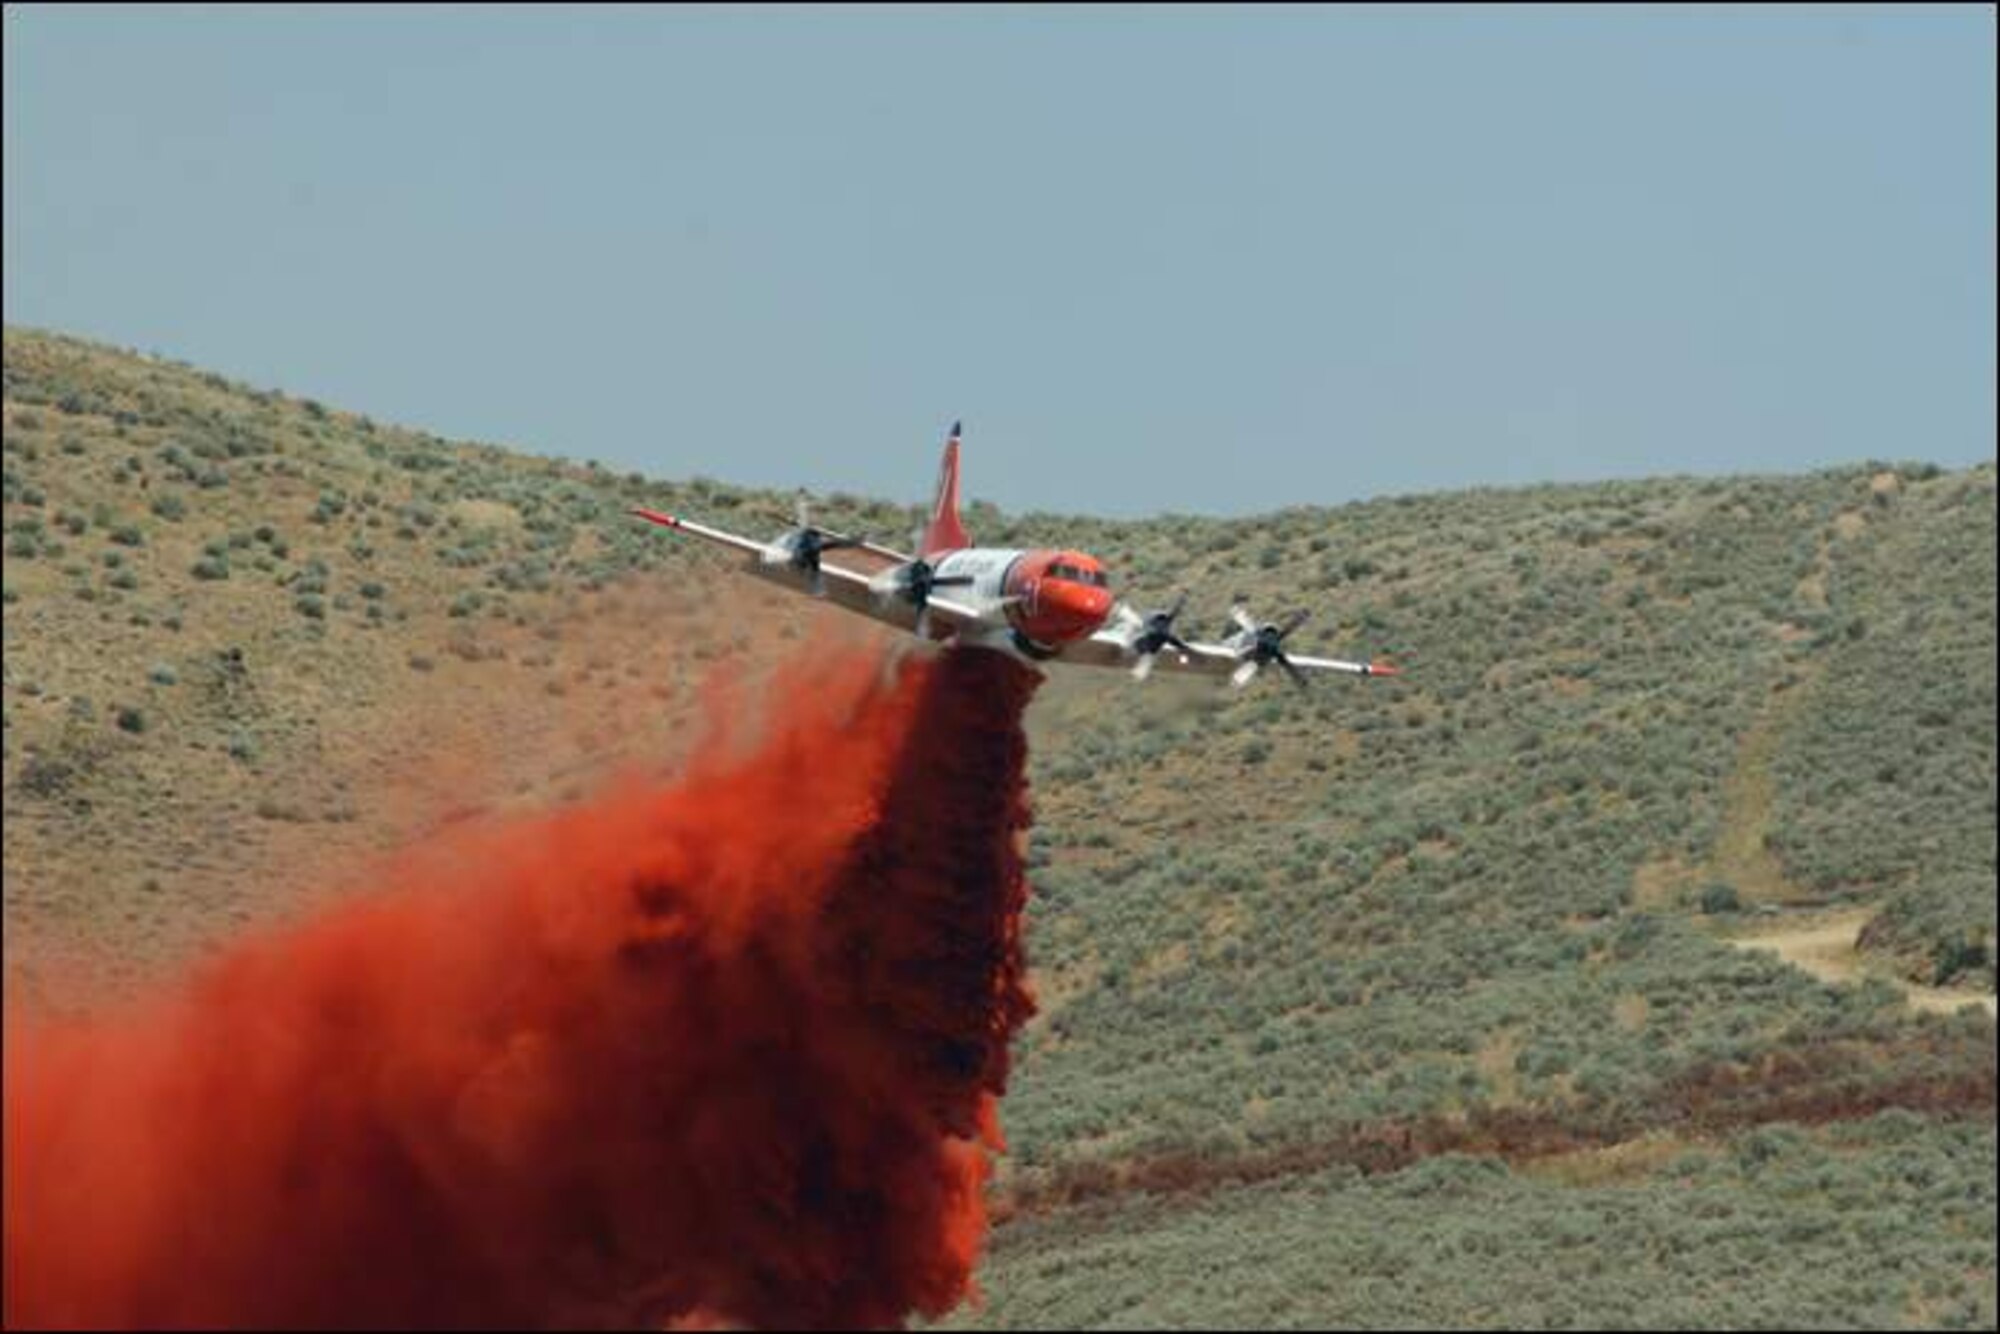 Aero Union’s P-3s, modified by the company for firefighting, travel around the country dumping thousands of gallons of red-dyed Phos-chek on wildfires. (Photo courtesy of Aero Union)